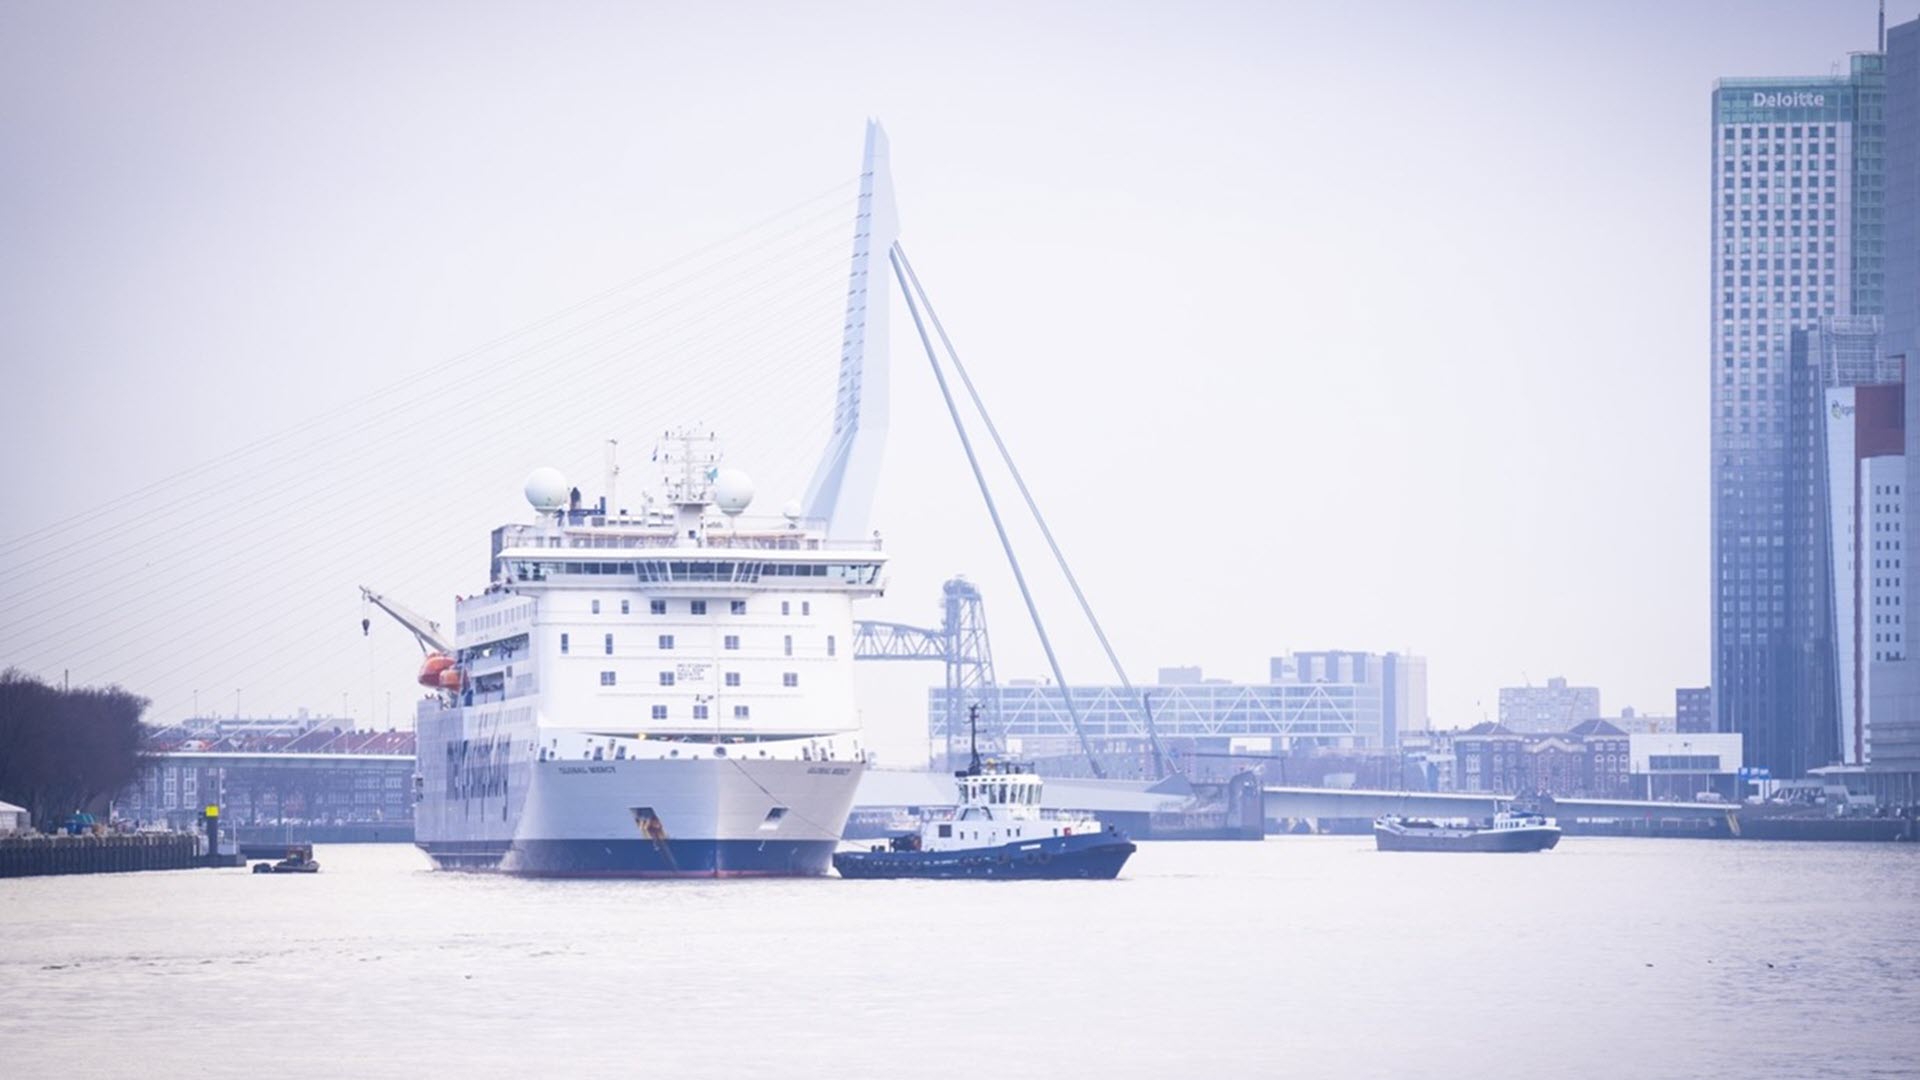 World's largest hospital ship makes healthcare available in remote areas